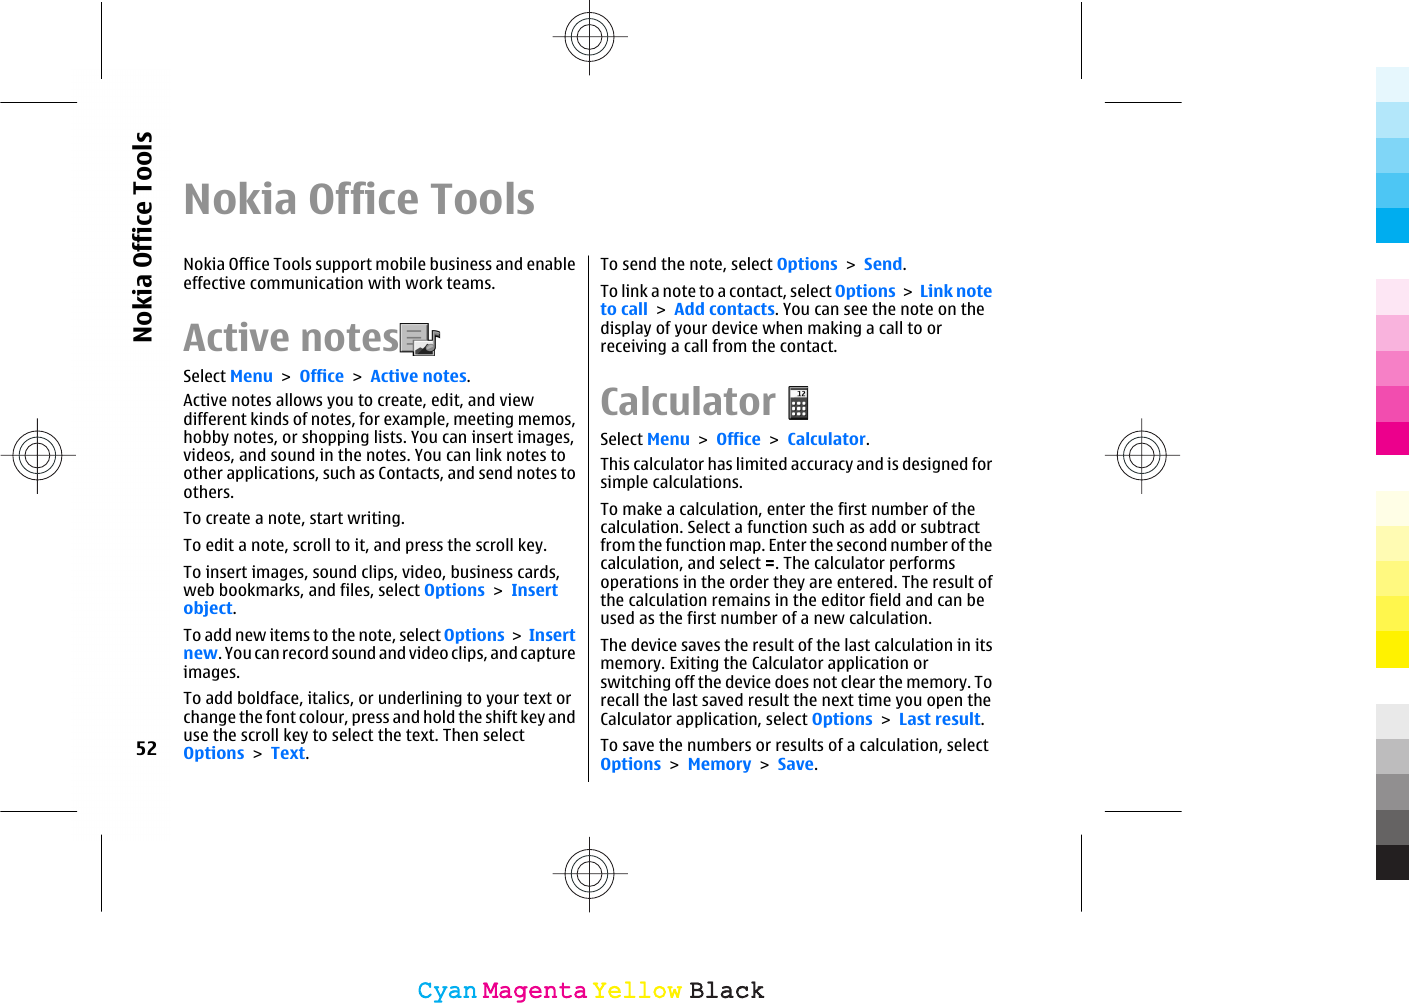 Nokia Office ToolsNokia Office Tools support mobile business and enableeffective communication with work teams.Active notes  Select Menu &gt; Office &gt; Active notes.Active notes allows you to create, edit, and viewdifferent kinds of notes, for example, meeting memos,hobby notes, or shopping lists. You can insert images,videos, and sound in the notes. You can link notes toother applications, such as Contacts, and send notes toothers.To create a note, start writing.To edit a note, scroll to it, and press the scroll key.To insert images, sound clips, video, business cards,web bookmarks, and files, select Options &gt; Insertobject.To add new items to the note, select Options &gt; Insertnew. You can record sound and video clips, and captureimages.To add boldface, italics, or underlining to your text orchange the font colour, press and hold the shift key anduse the scroll key to select the text. Then selectOptions &gt; Text.To send the note, select Options &gt; Send.To link a note to a contact, select Options &gt; Link noteto call &gt; Add contacts. You can see the note on thedisplay of your device when making a call to orreceiving a call from the contact.CalculatorSelect Menu &gt; Office &gt; Calculator.This calculator has limited accuracy and is designed forsimple calculations.To make a calculation, enter the first number of thecalculation. Select a function such as add or subtractfrom the function map. Enter the second number of thecalculation, and select =. The calculator performsoperations in the order they are entered. The result ofthe calculation remains in the editor field and can beused as the first number of a new calculation.The device saves the result of the last calculation in itsmemory. Exiting the Calculator application orswitching off the device does not clear the memory. Torecall the last saved result the next time you open theCalculator application, select Options &gt; Last result.To save the numbers or results of a calculation, selectOptions &gt; Memory &gt; Save.52Nokia Office ToolsCyanCyanMagentaMagentaYellowYellowBlackBlack